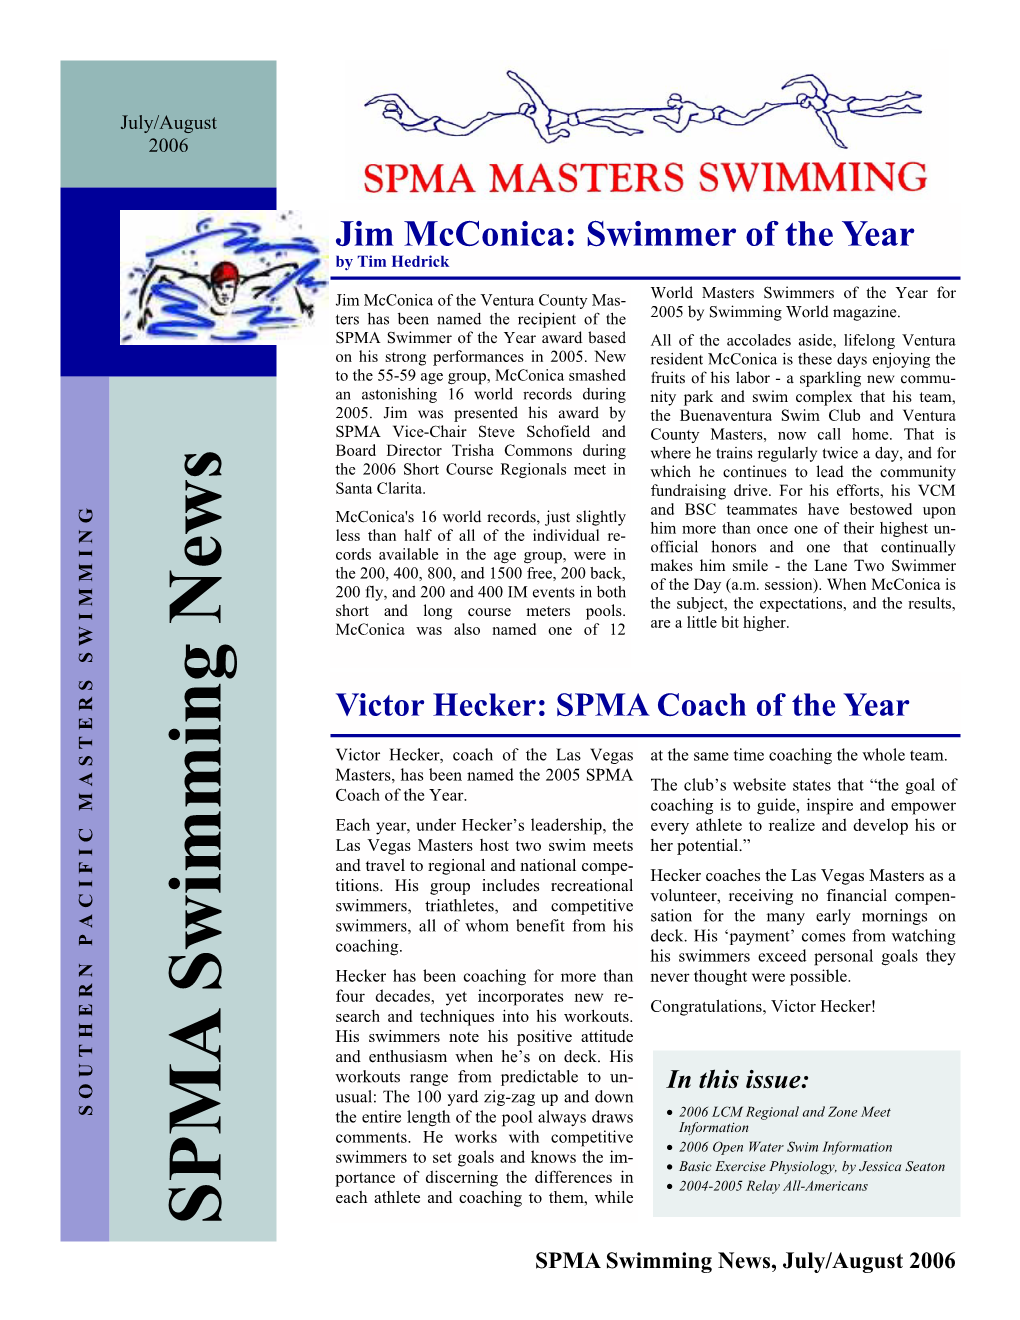 Jim Mcconica: Swimmer of the Year by Tim Hedrick